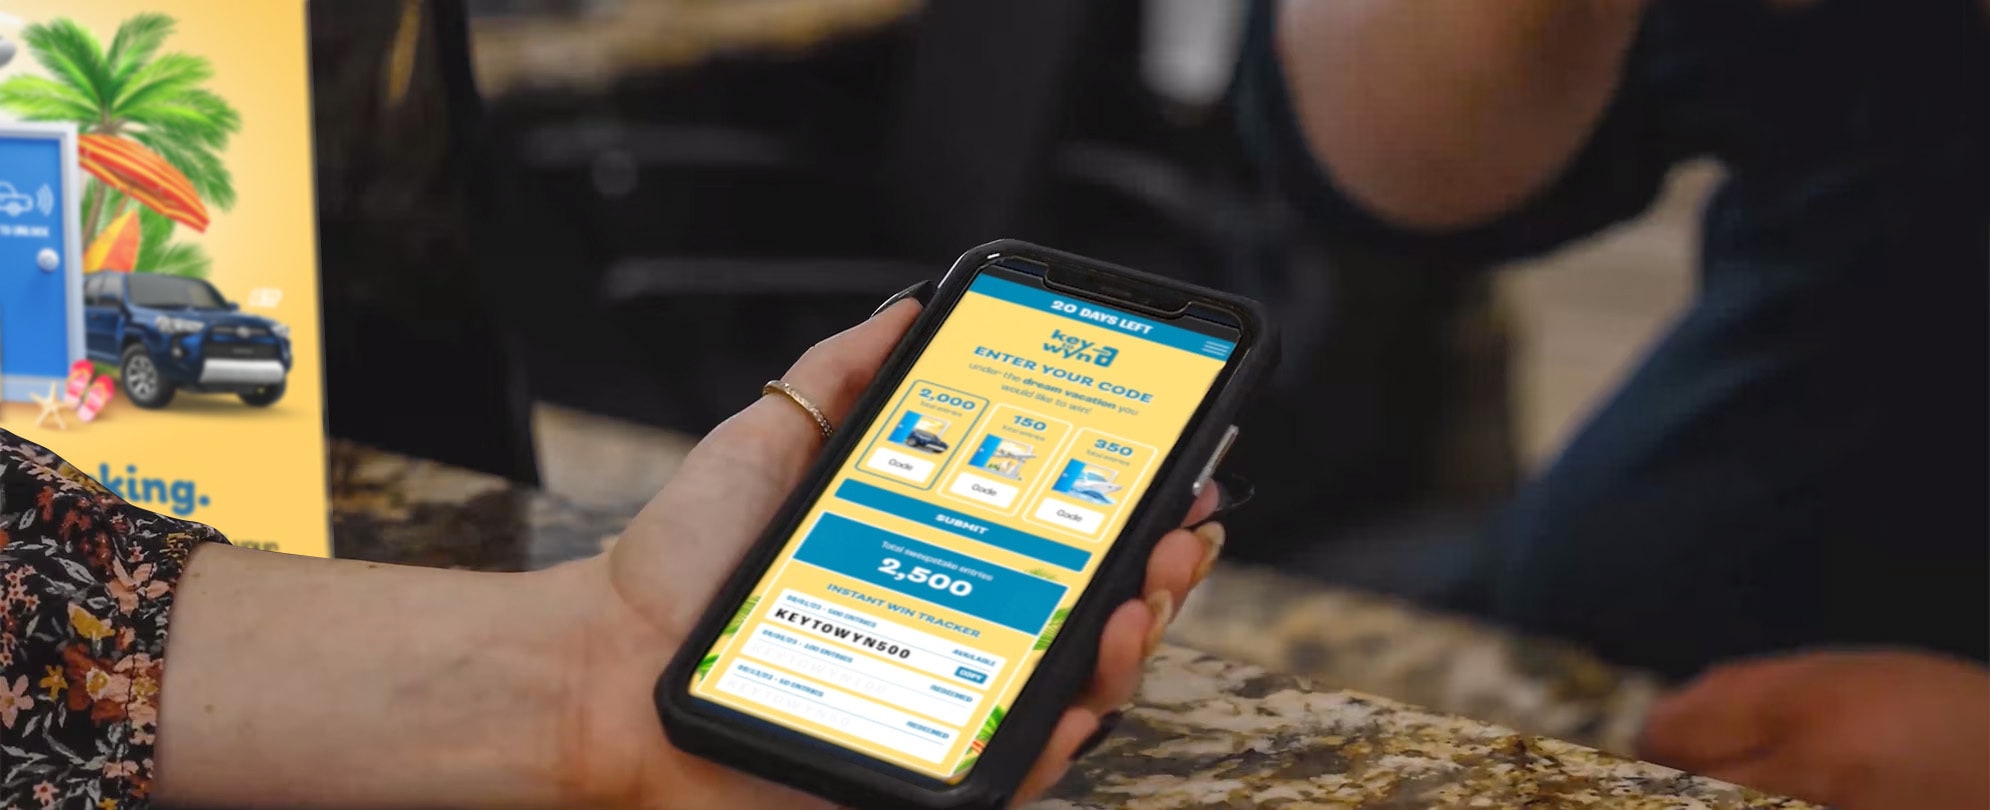 A woman's hand holds a smartphone with the yellow and blue Key To Wyn landing page loaded onto the screen.